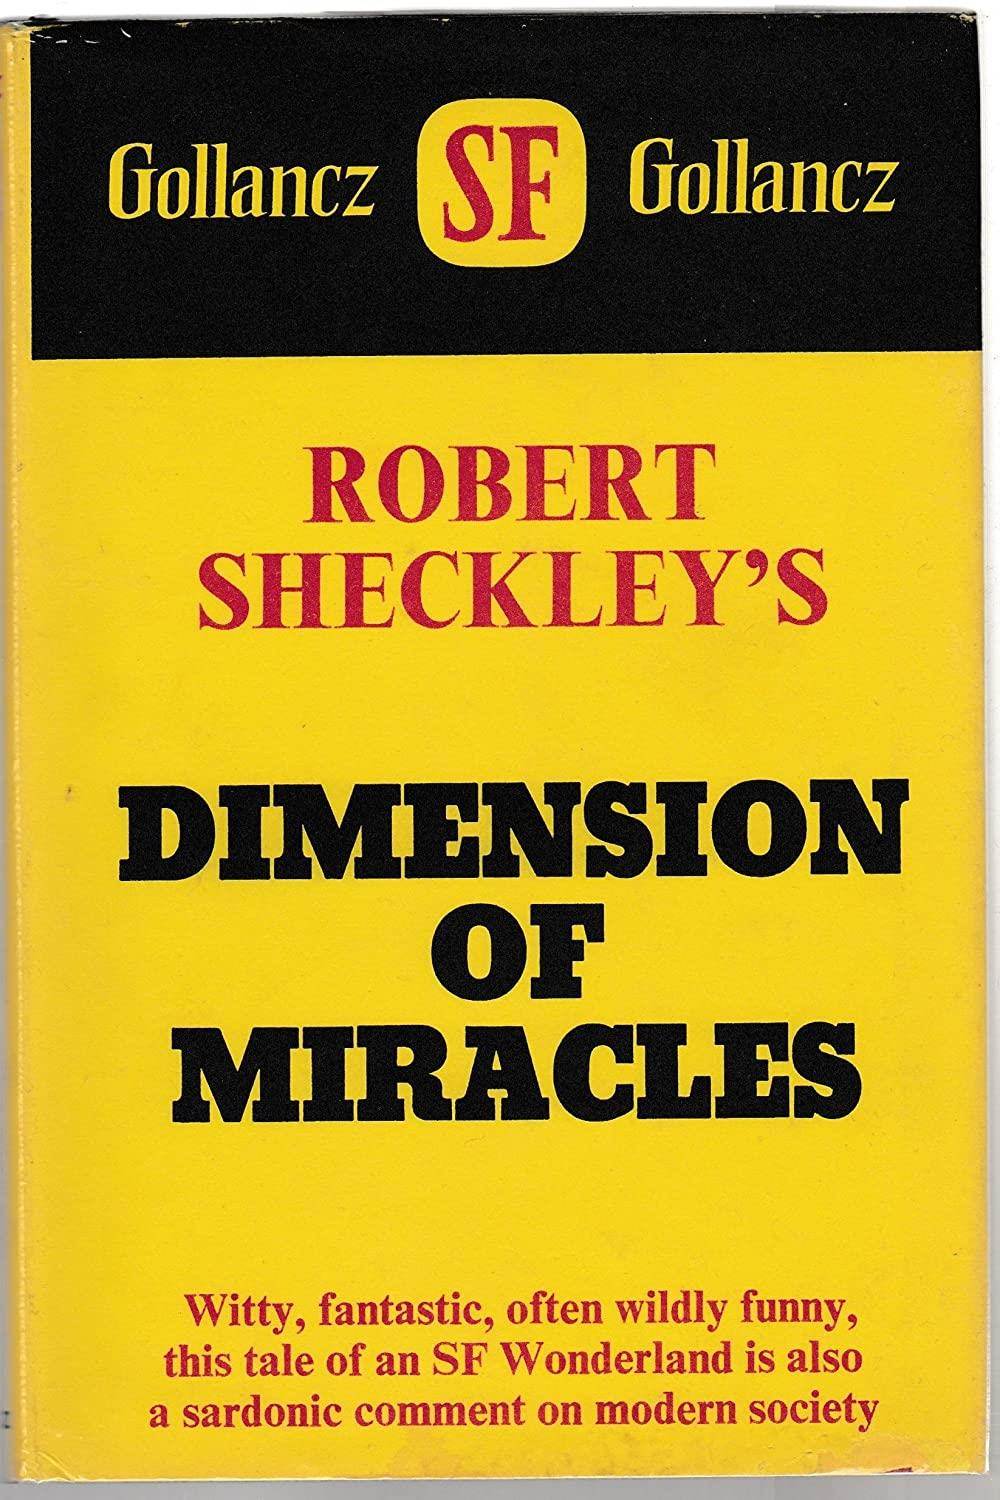 Dimension of miracles ([Gollancz SF])